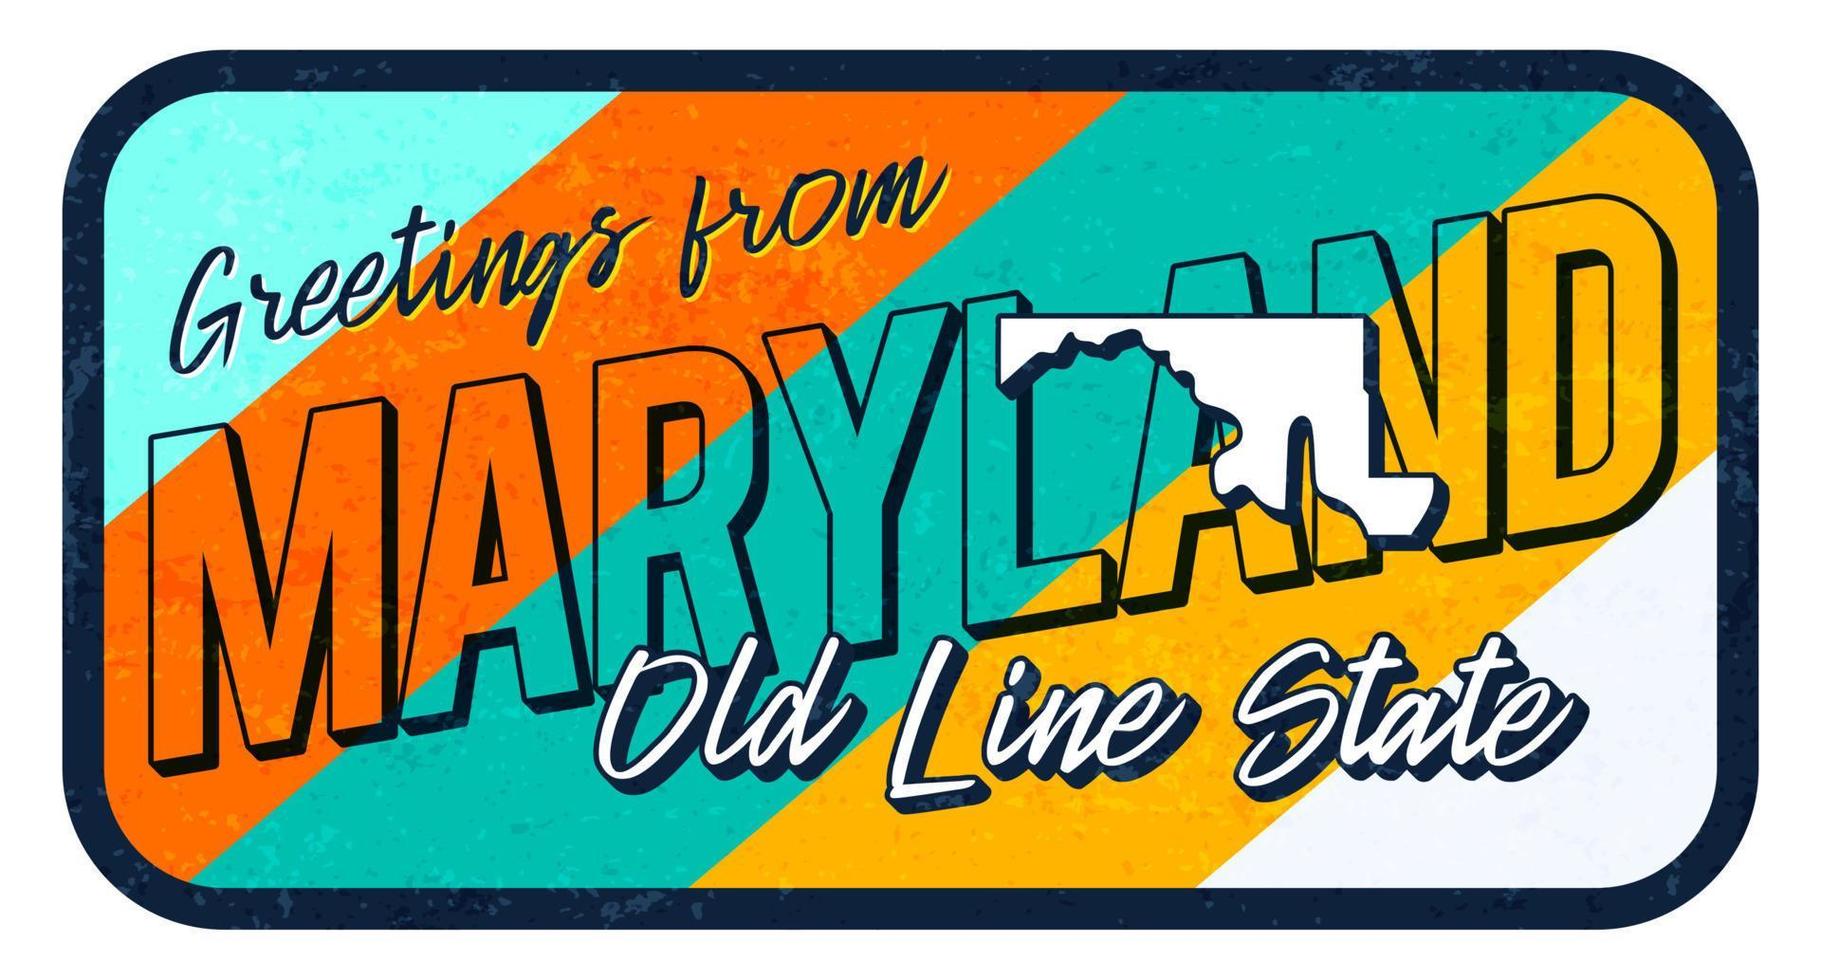 Greeting from meryland vintage rusty metal sign vector illustration. Vector state map in grunge style with Typography hand drawn lettering.